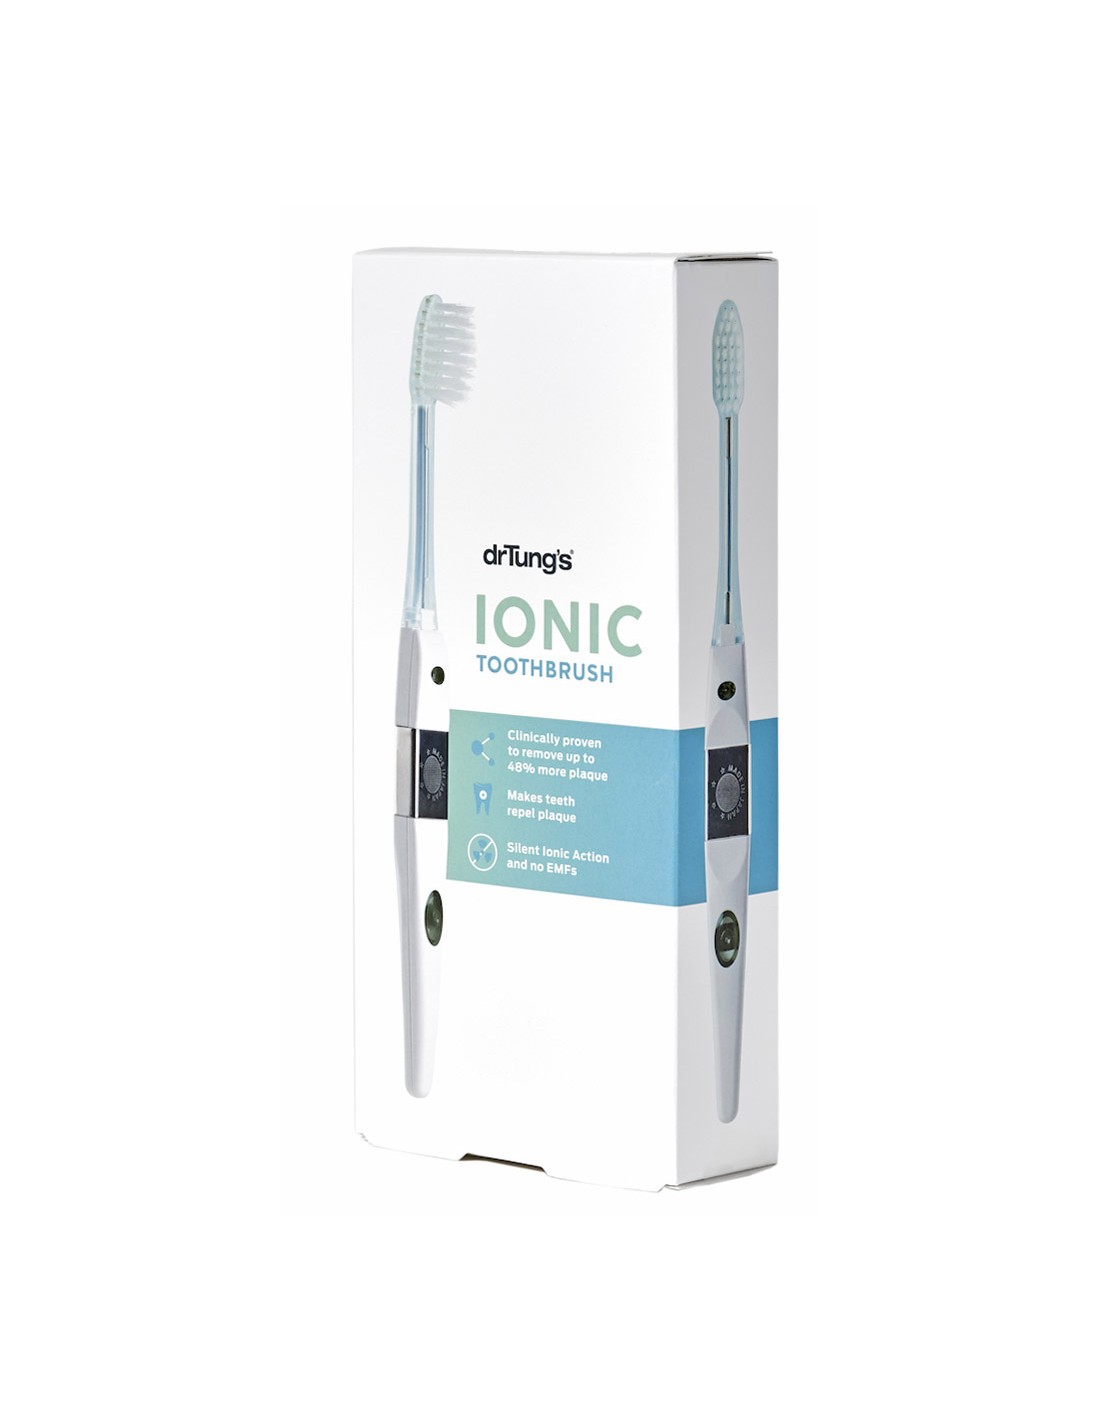 Kalmte Boven hoofd en schouder papier Ionic Toothbrush System - Most advanced toothbrush in the world!